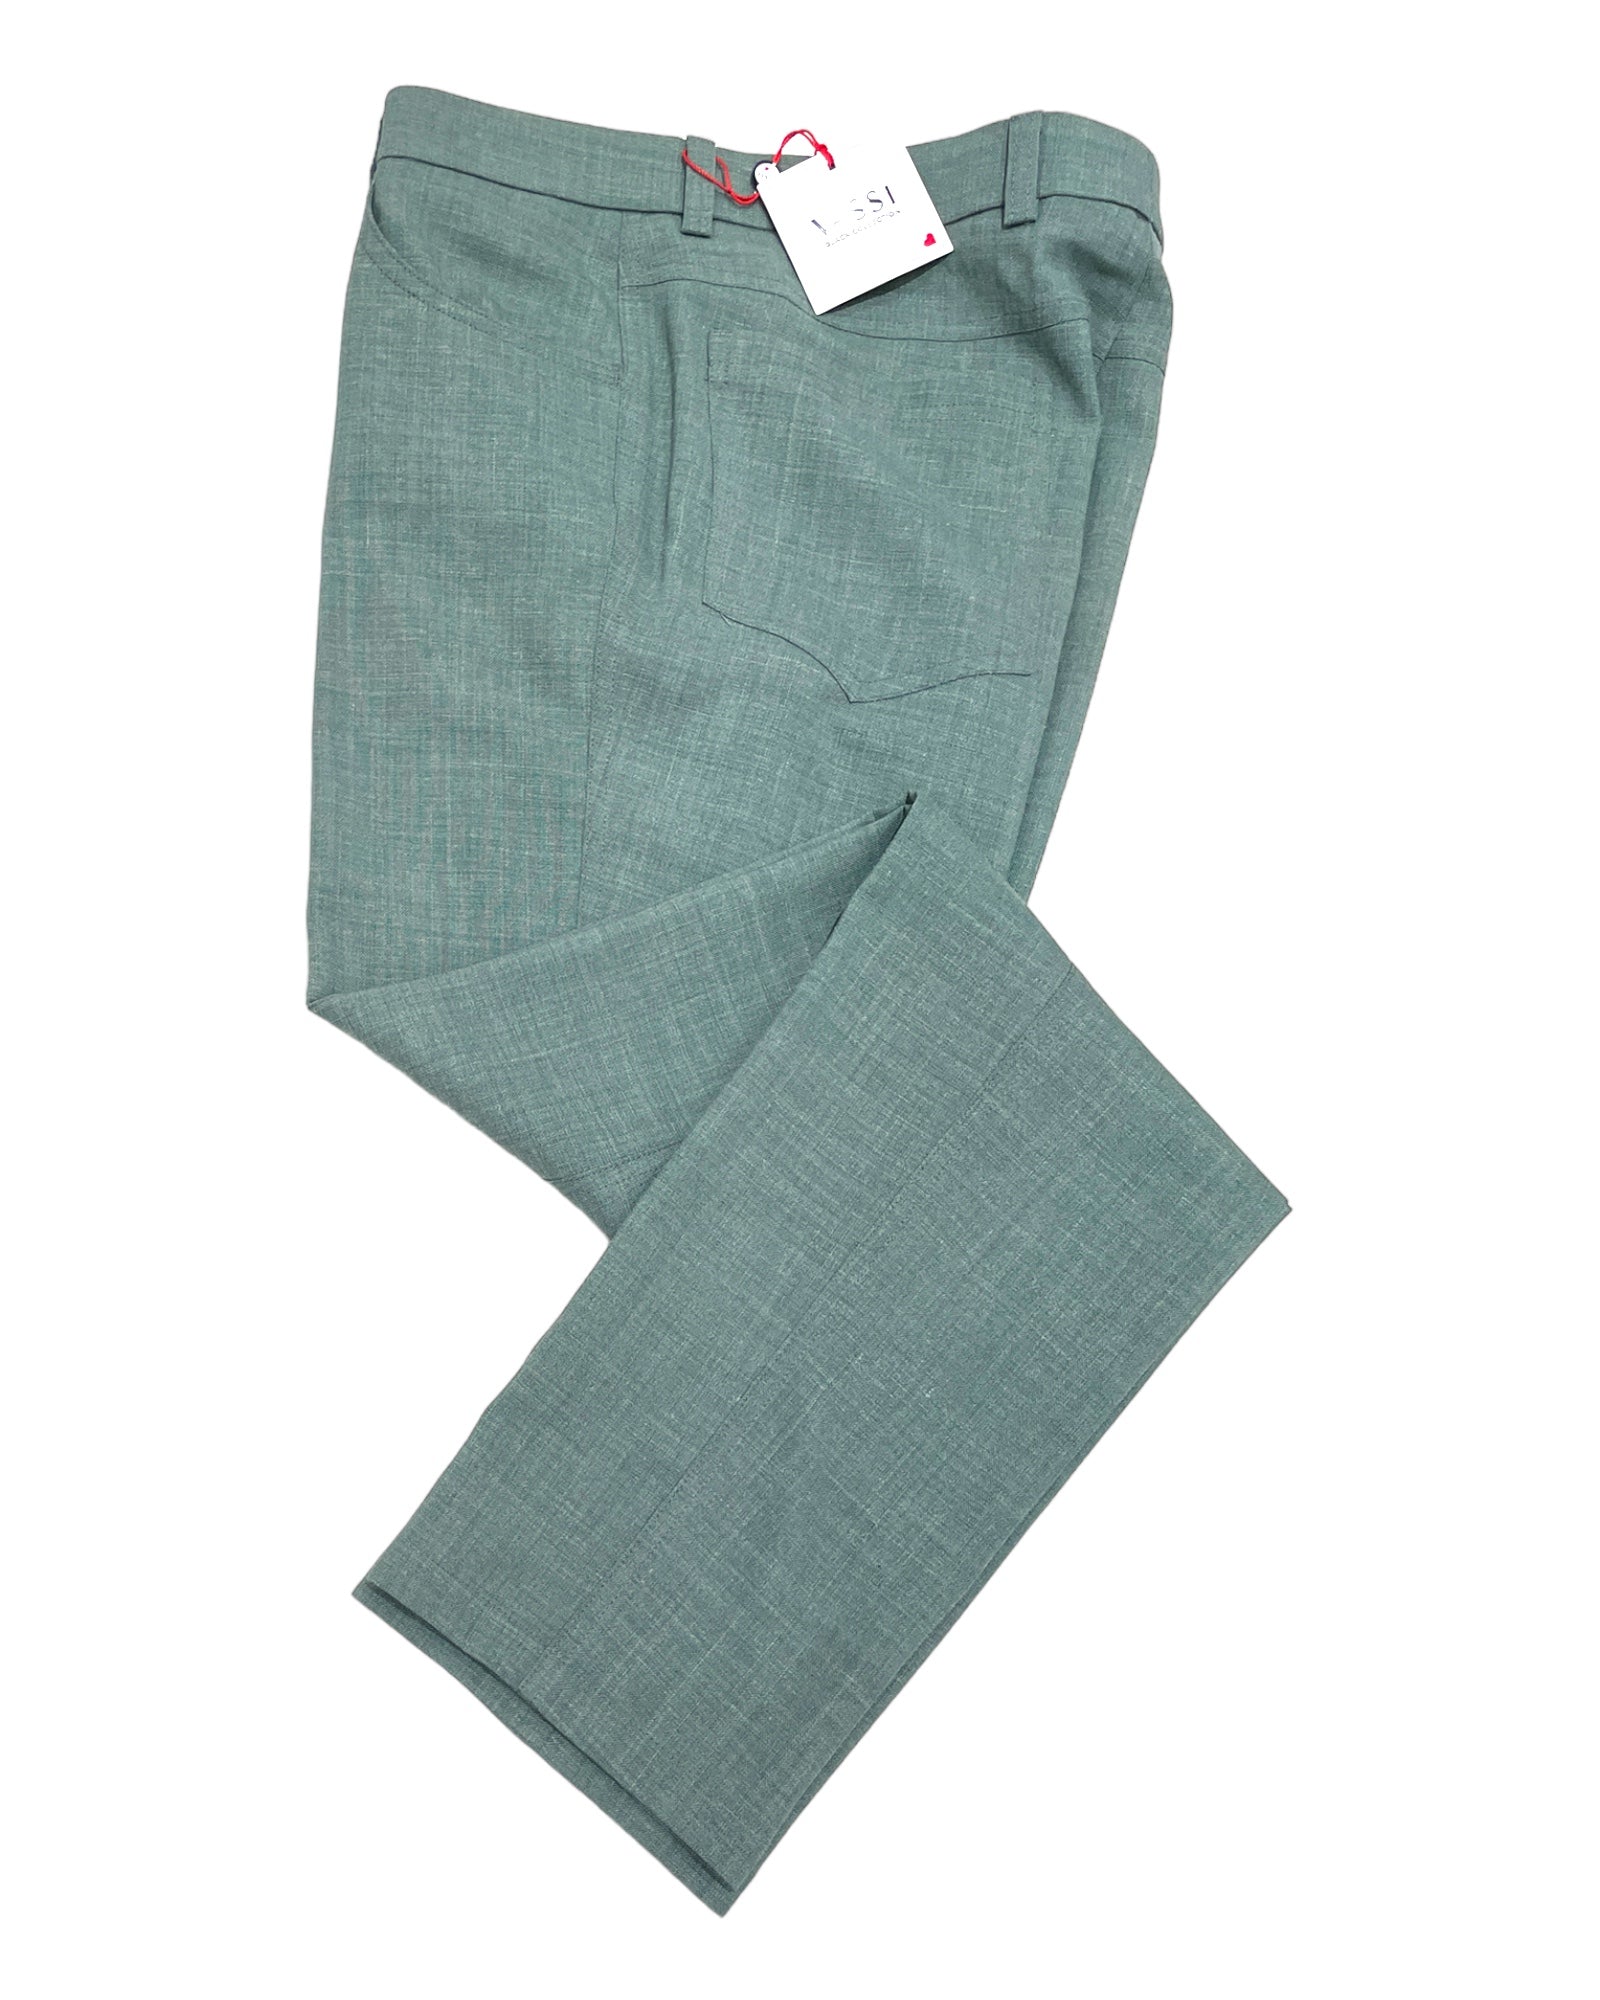 Easy Care Linen 5-Pocket Pants in Green CASUAL PANTS32